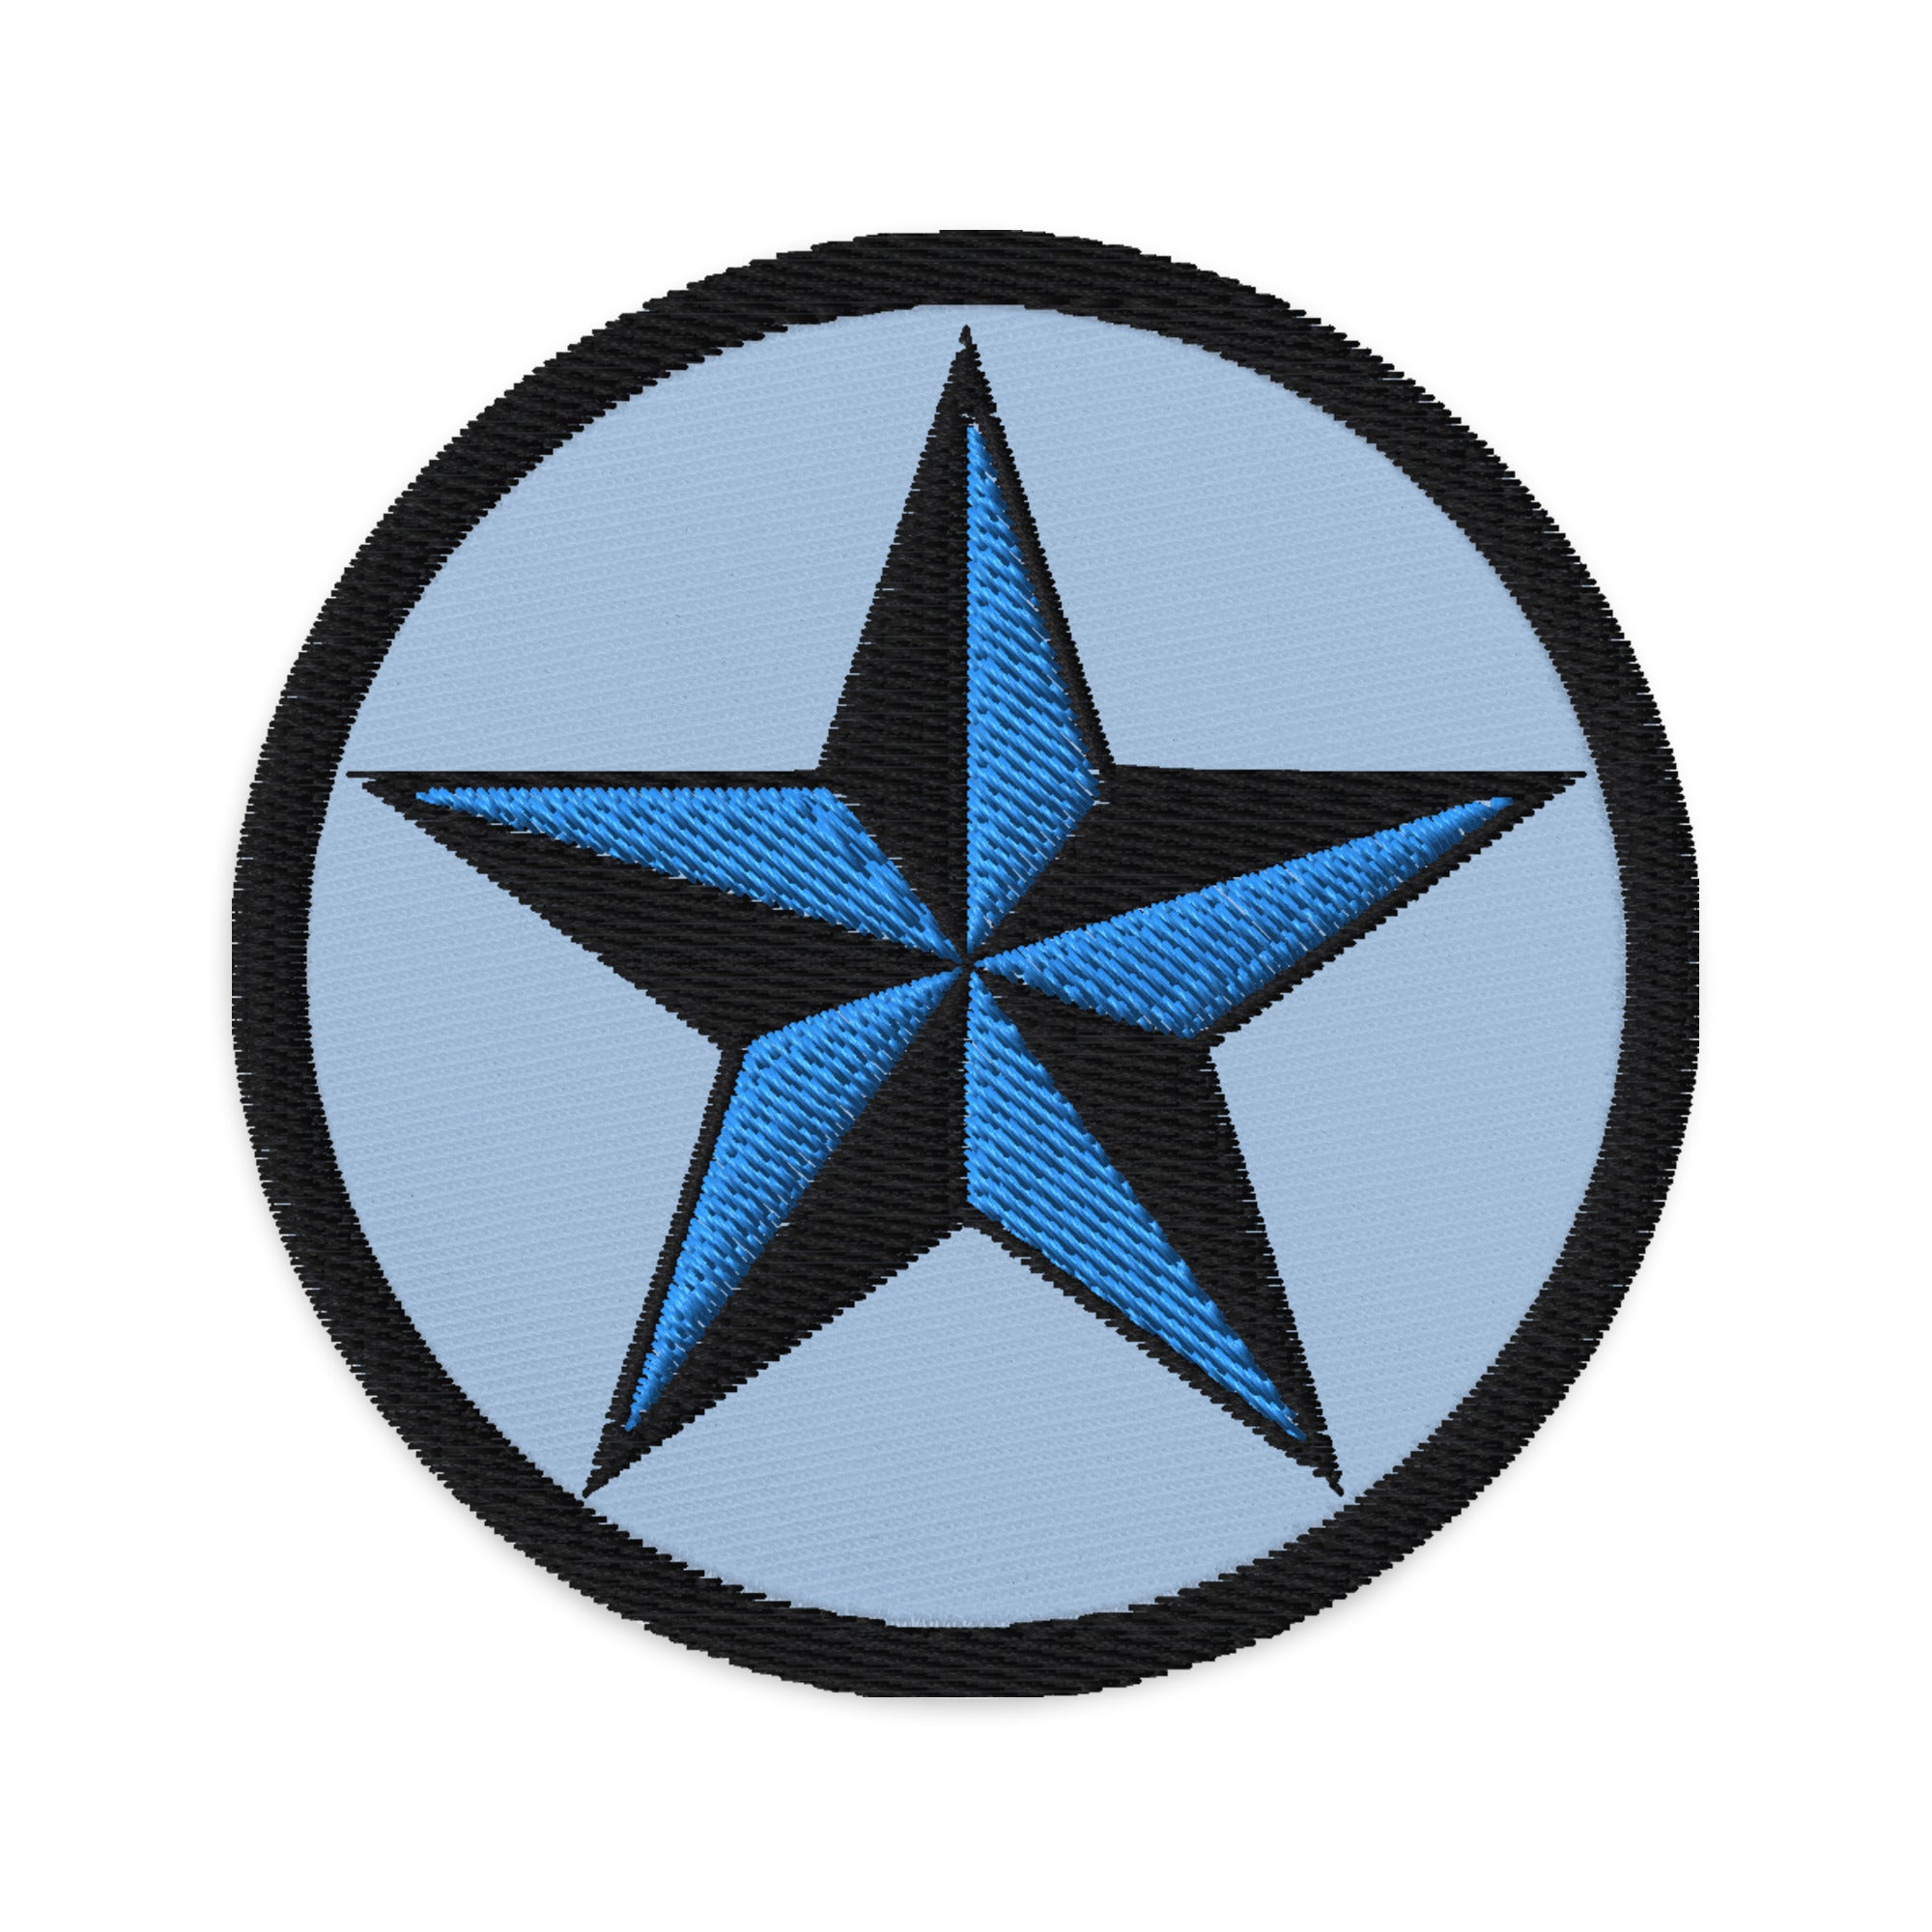 Nautical Star North Star Embroidered Patch Blue / Black Thread - Edge of Life Designs